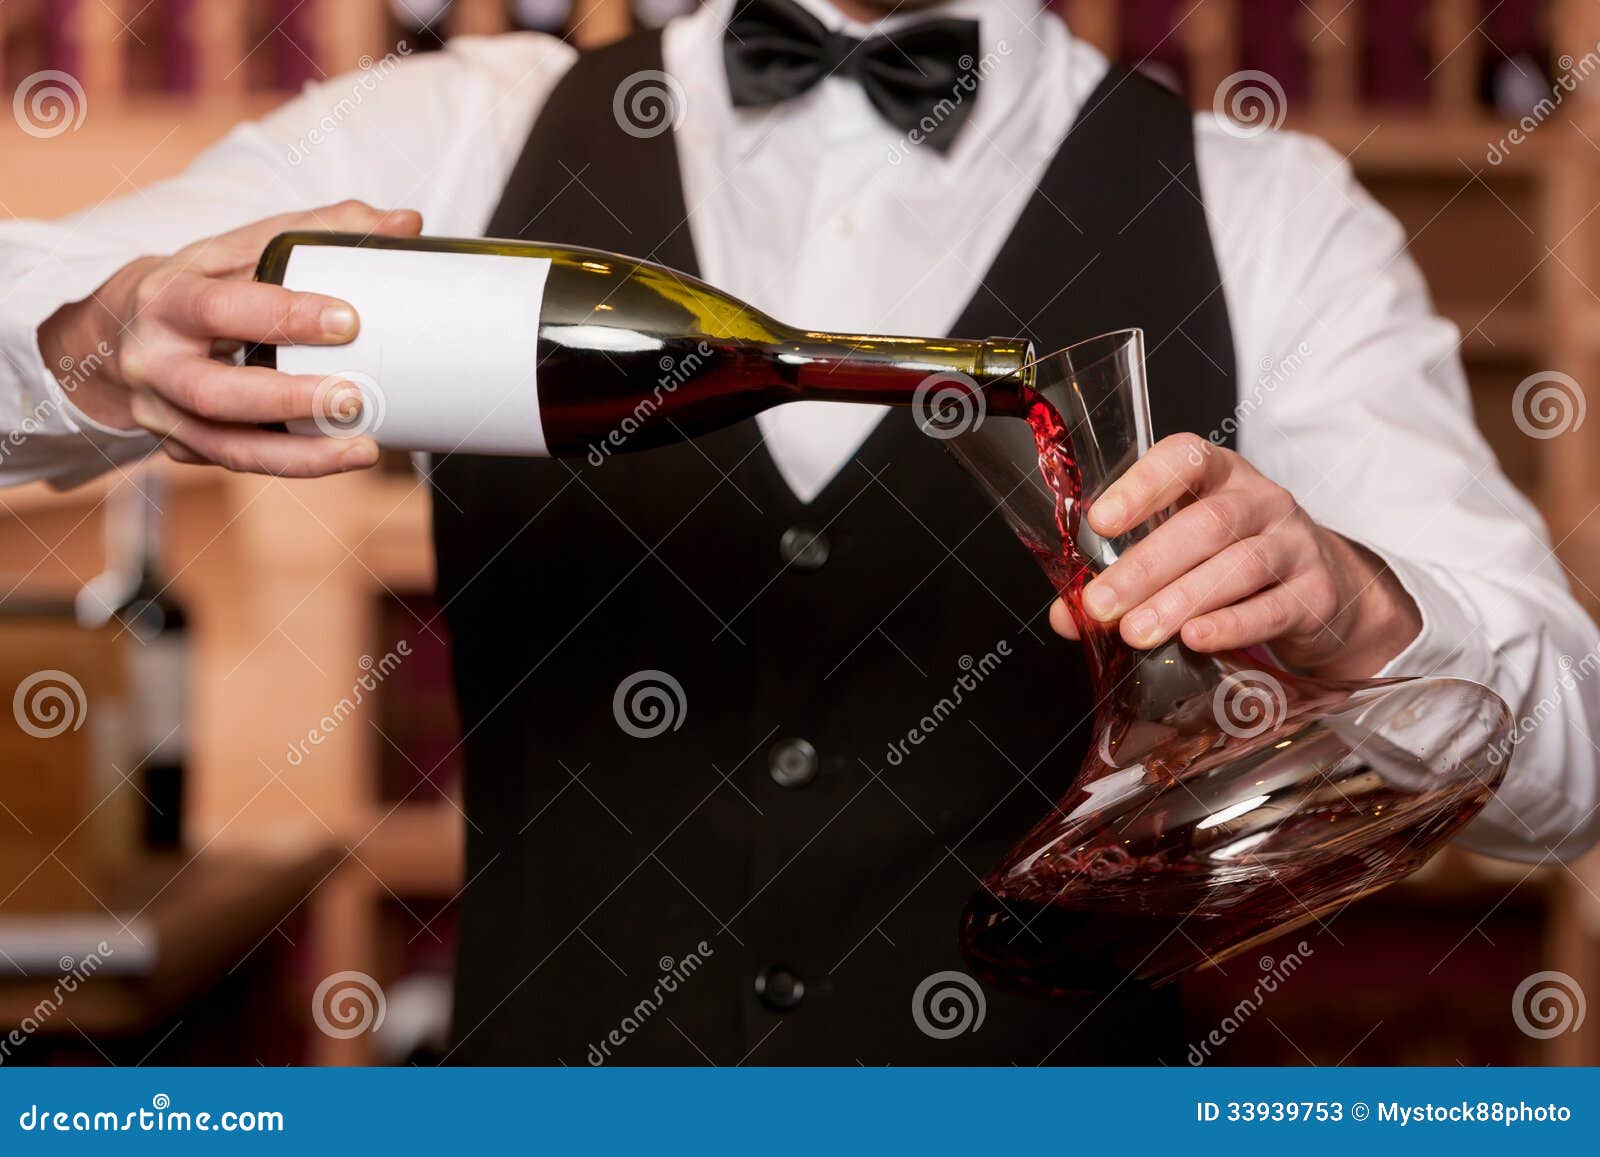 Sommelier with decanter. Cropped image of sommelier pouring wine to the decanter